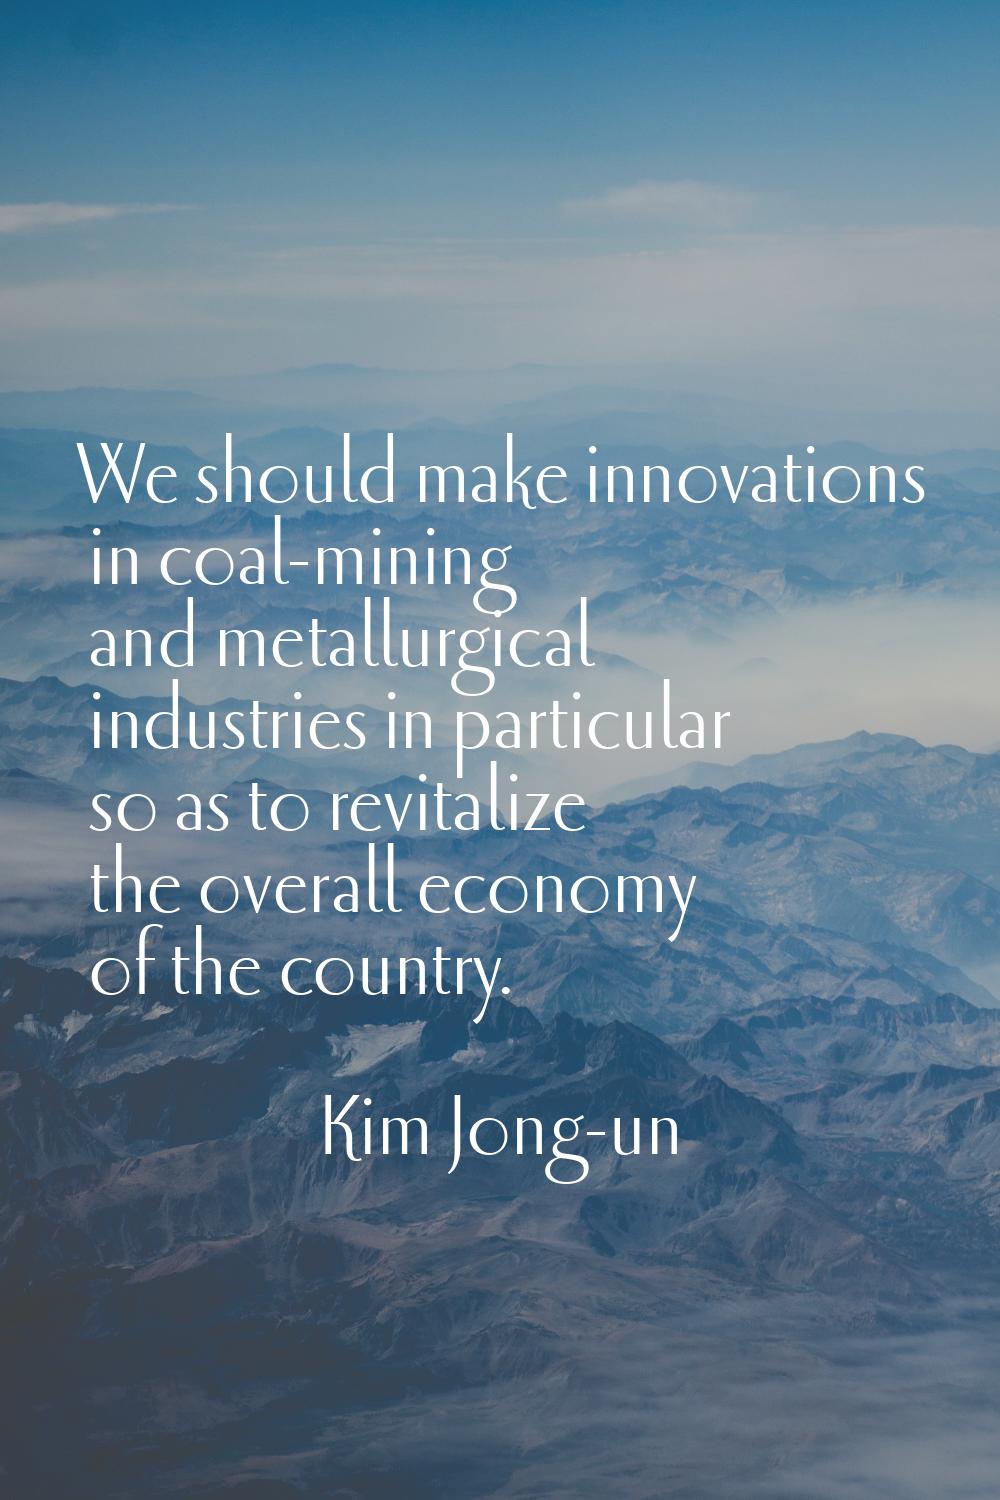 We should make innovations in coal-mining and metallurgical industries in particular so as to revit